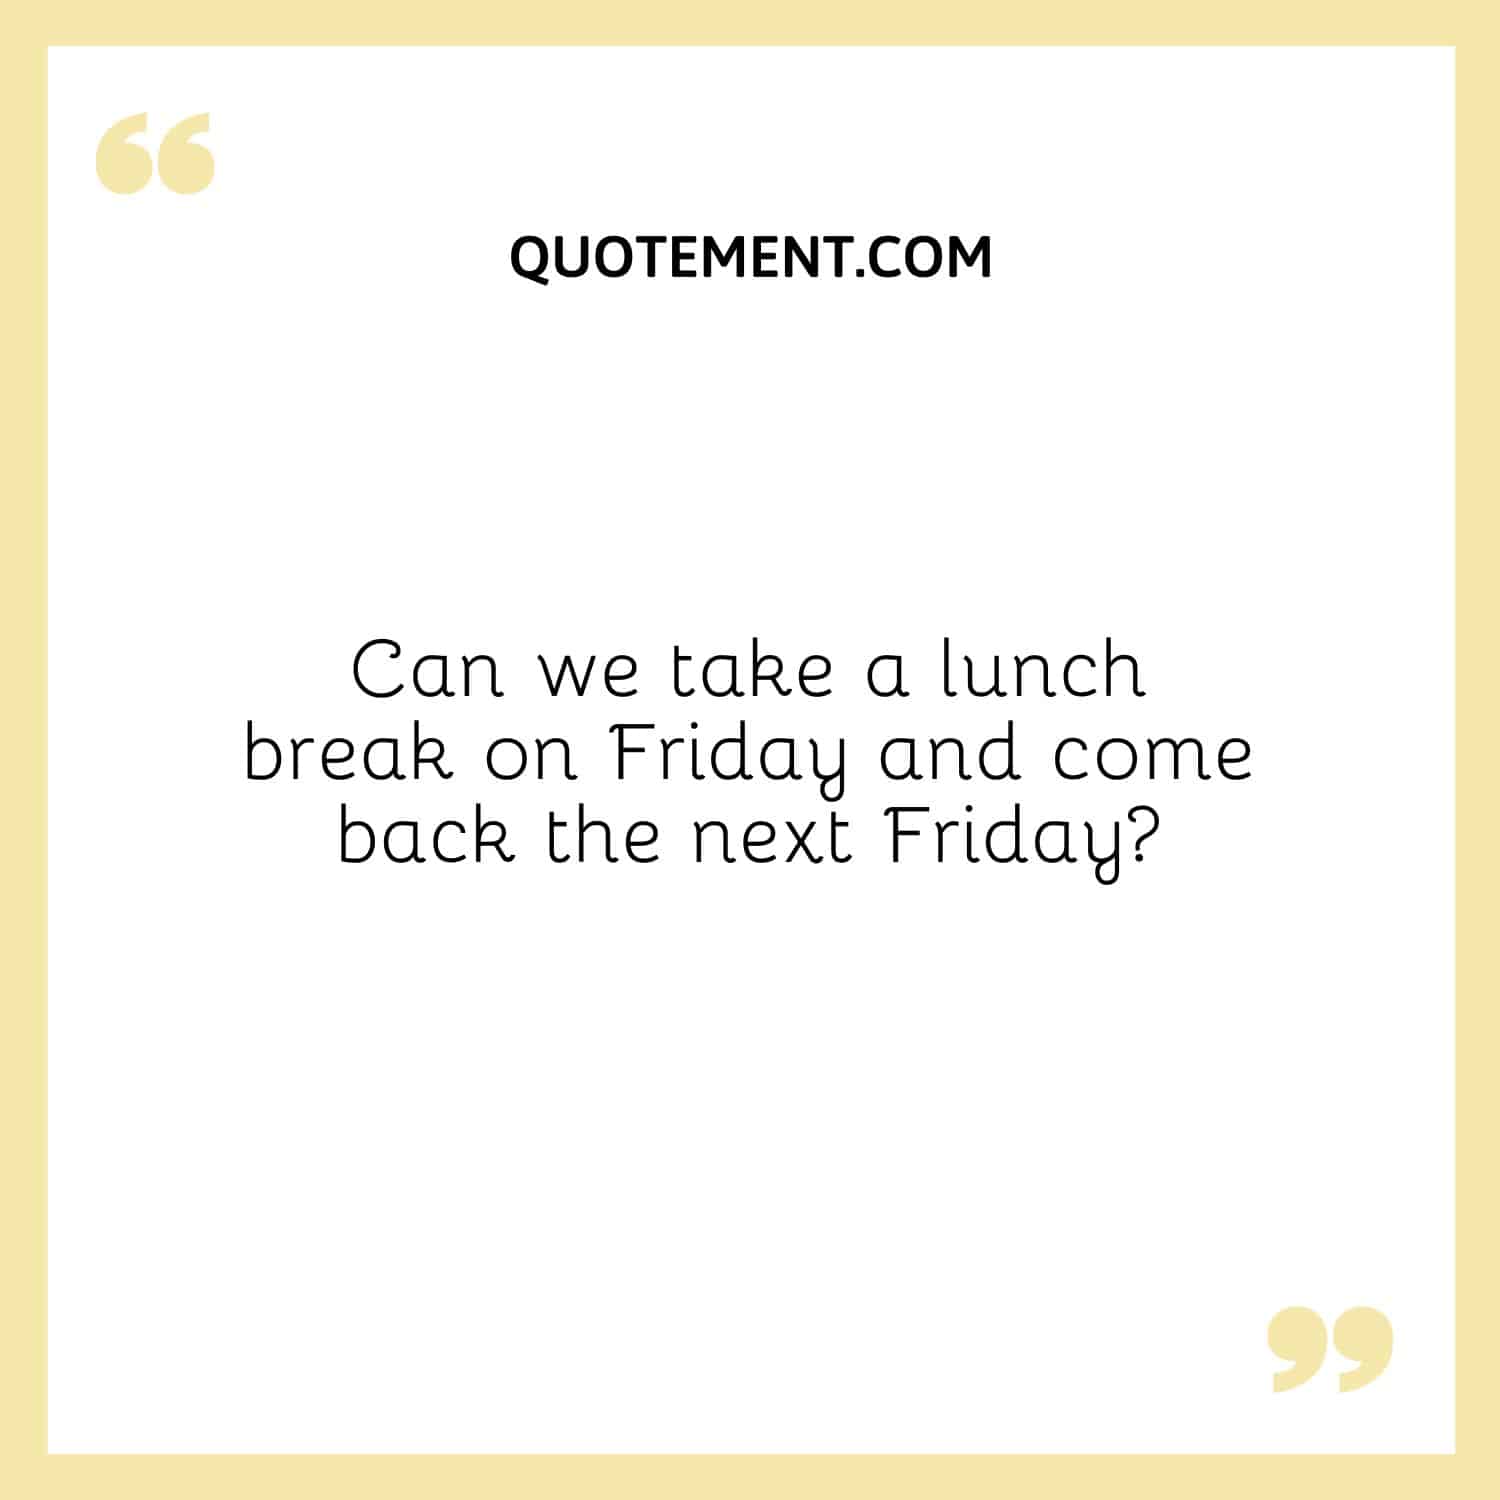 Can we take a lunch break on Friday